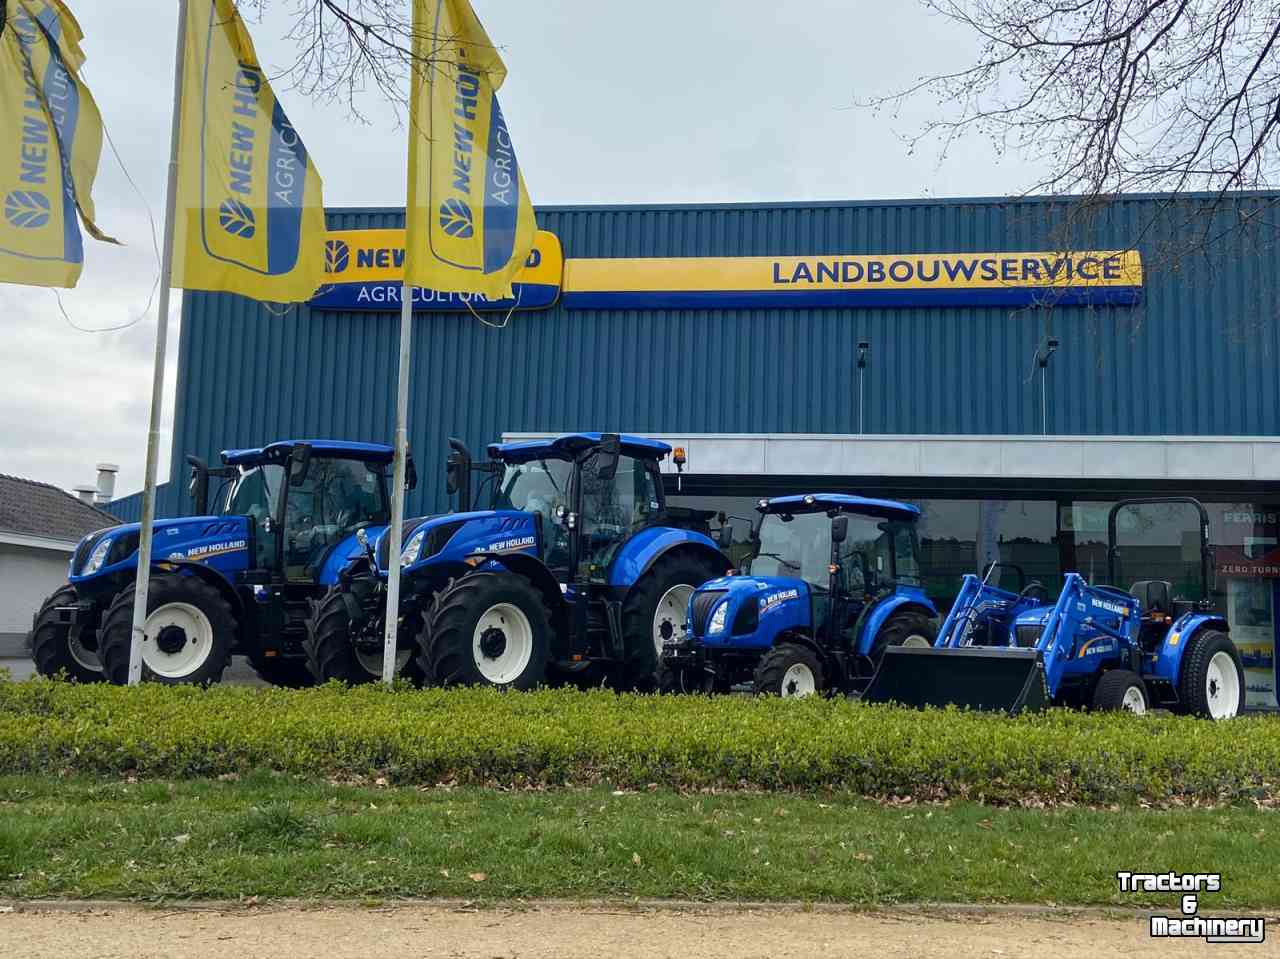 Tracteur pour horticulture New Holland Boomer 25